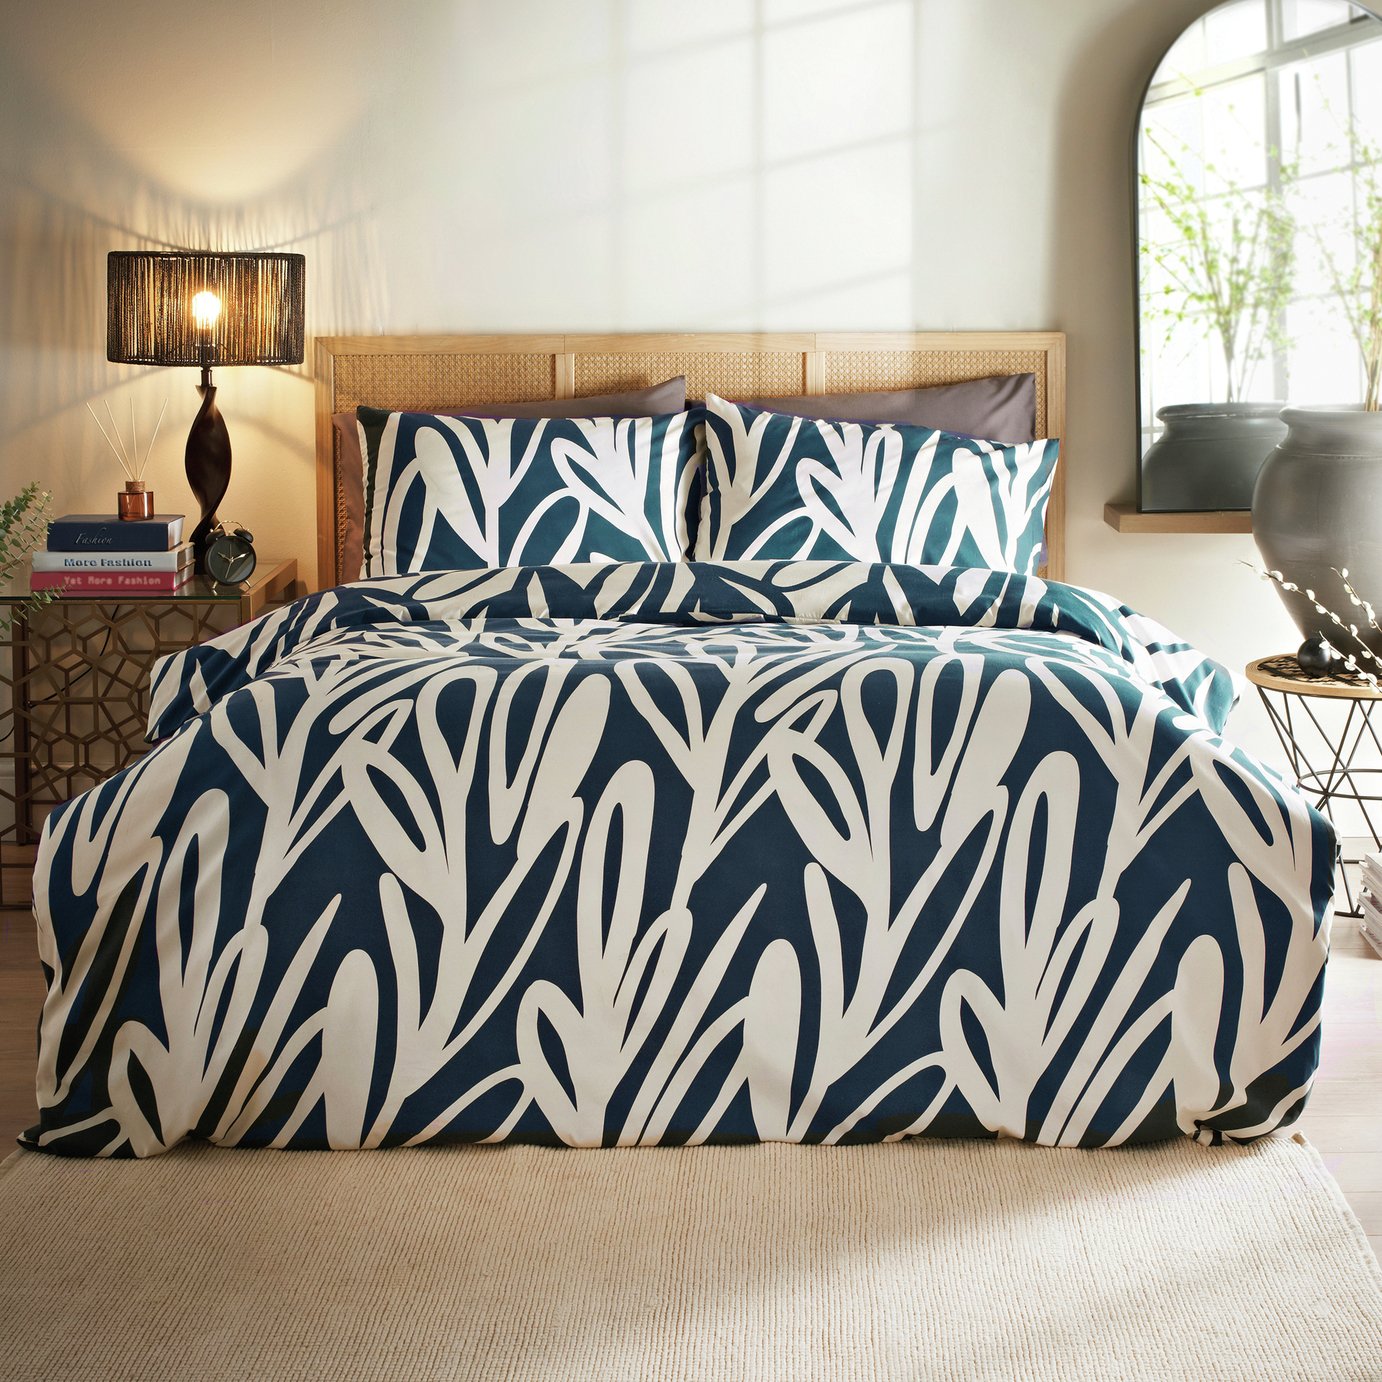 Cosmo Living Abstract Leaf Navy Bedding Set - Double